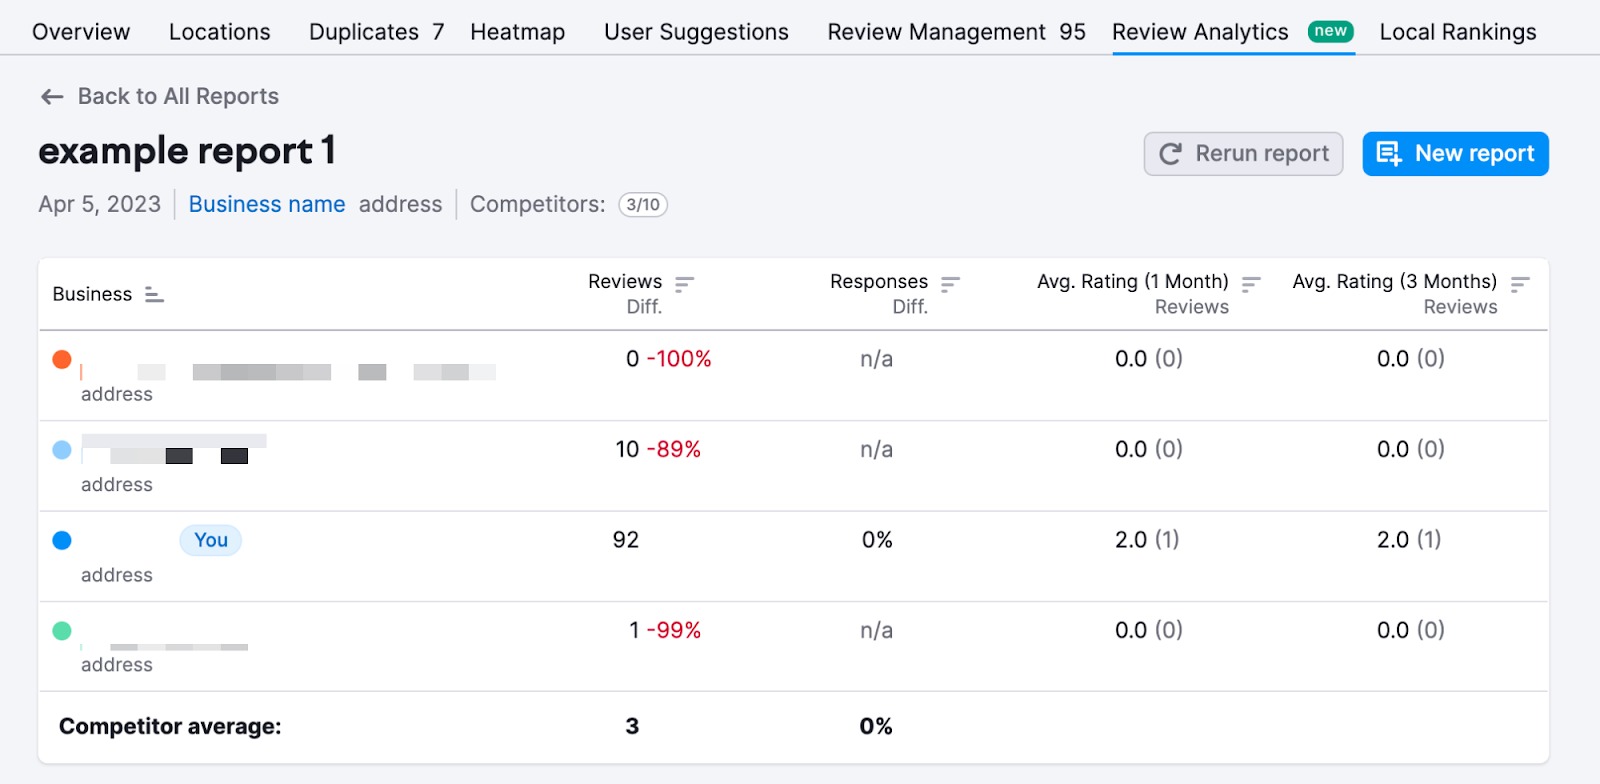 A screenshot with the example report showing reviews, ratings, and average ratings for 1 and 3 months. 